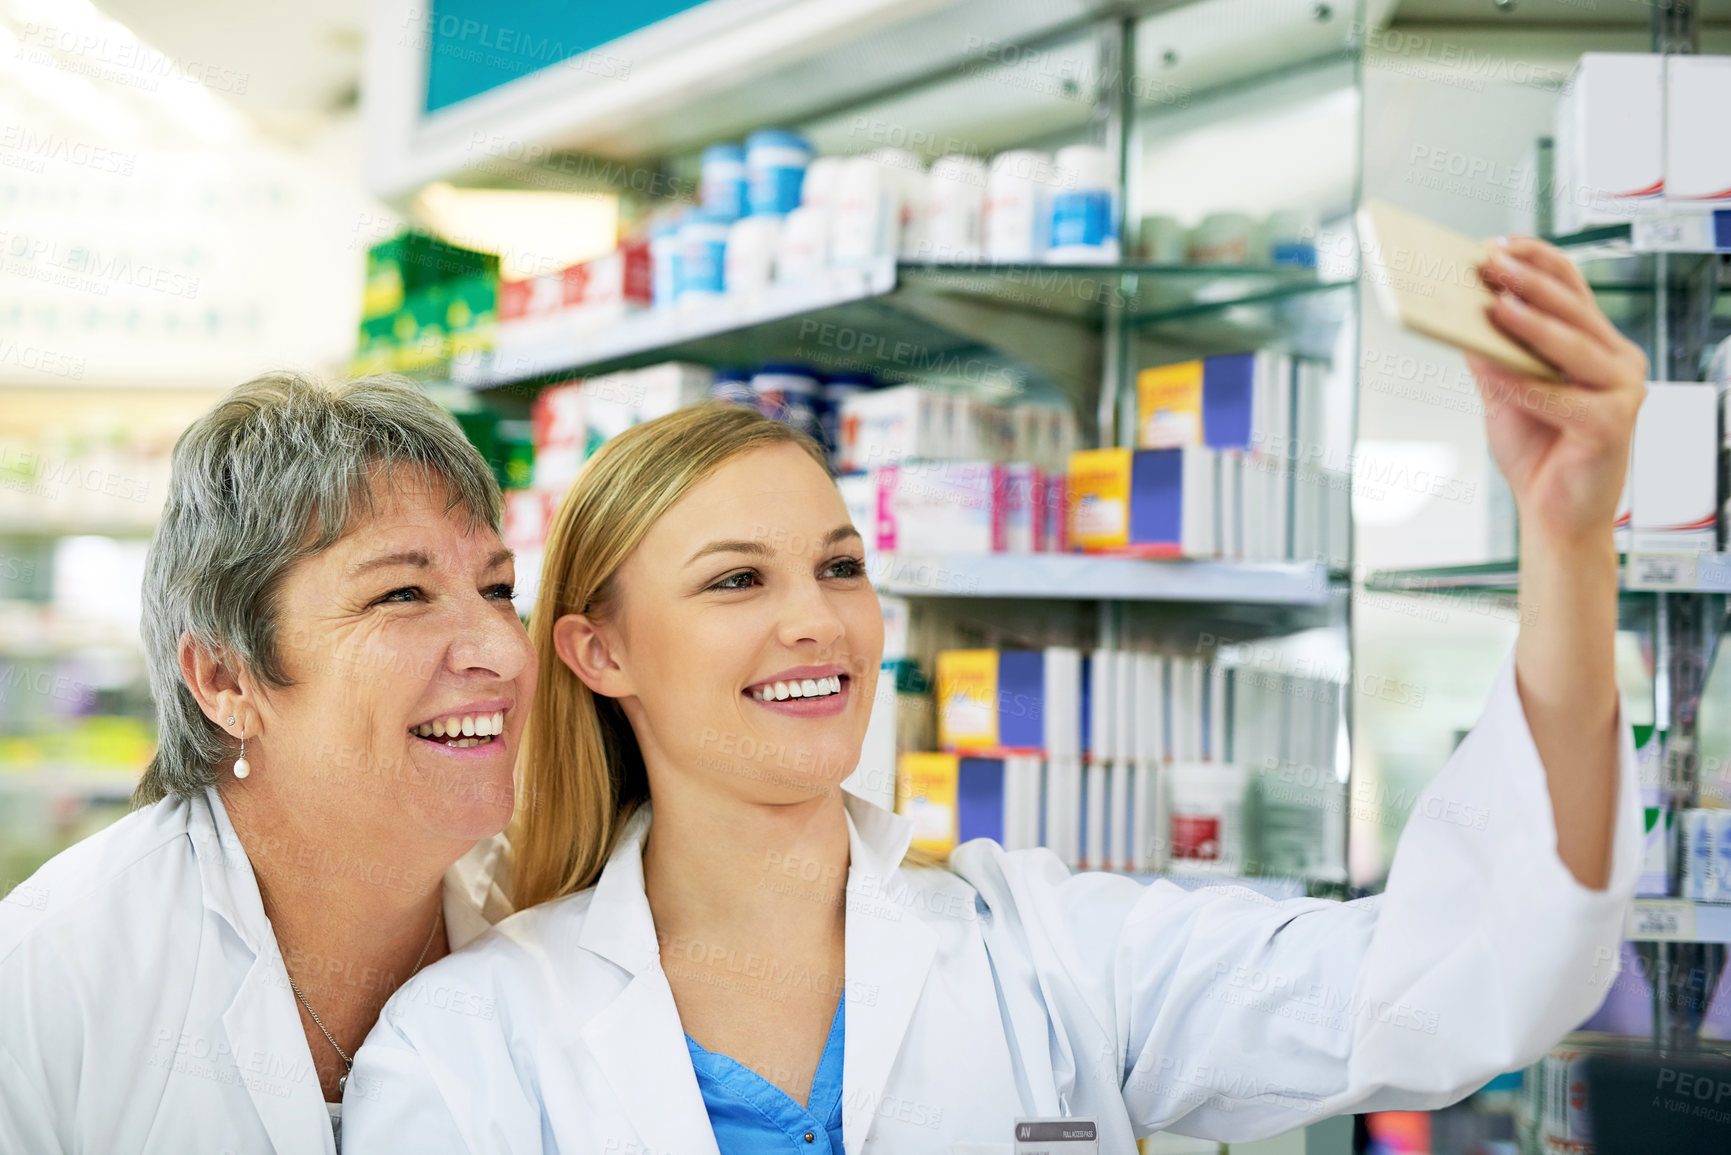 Buy stock photo Shot of two happy pharmacists taking a selfie together in a chemist